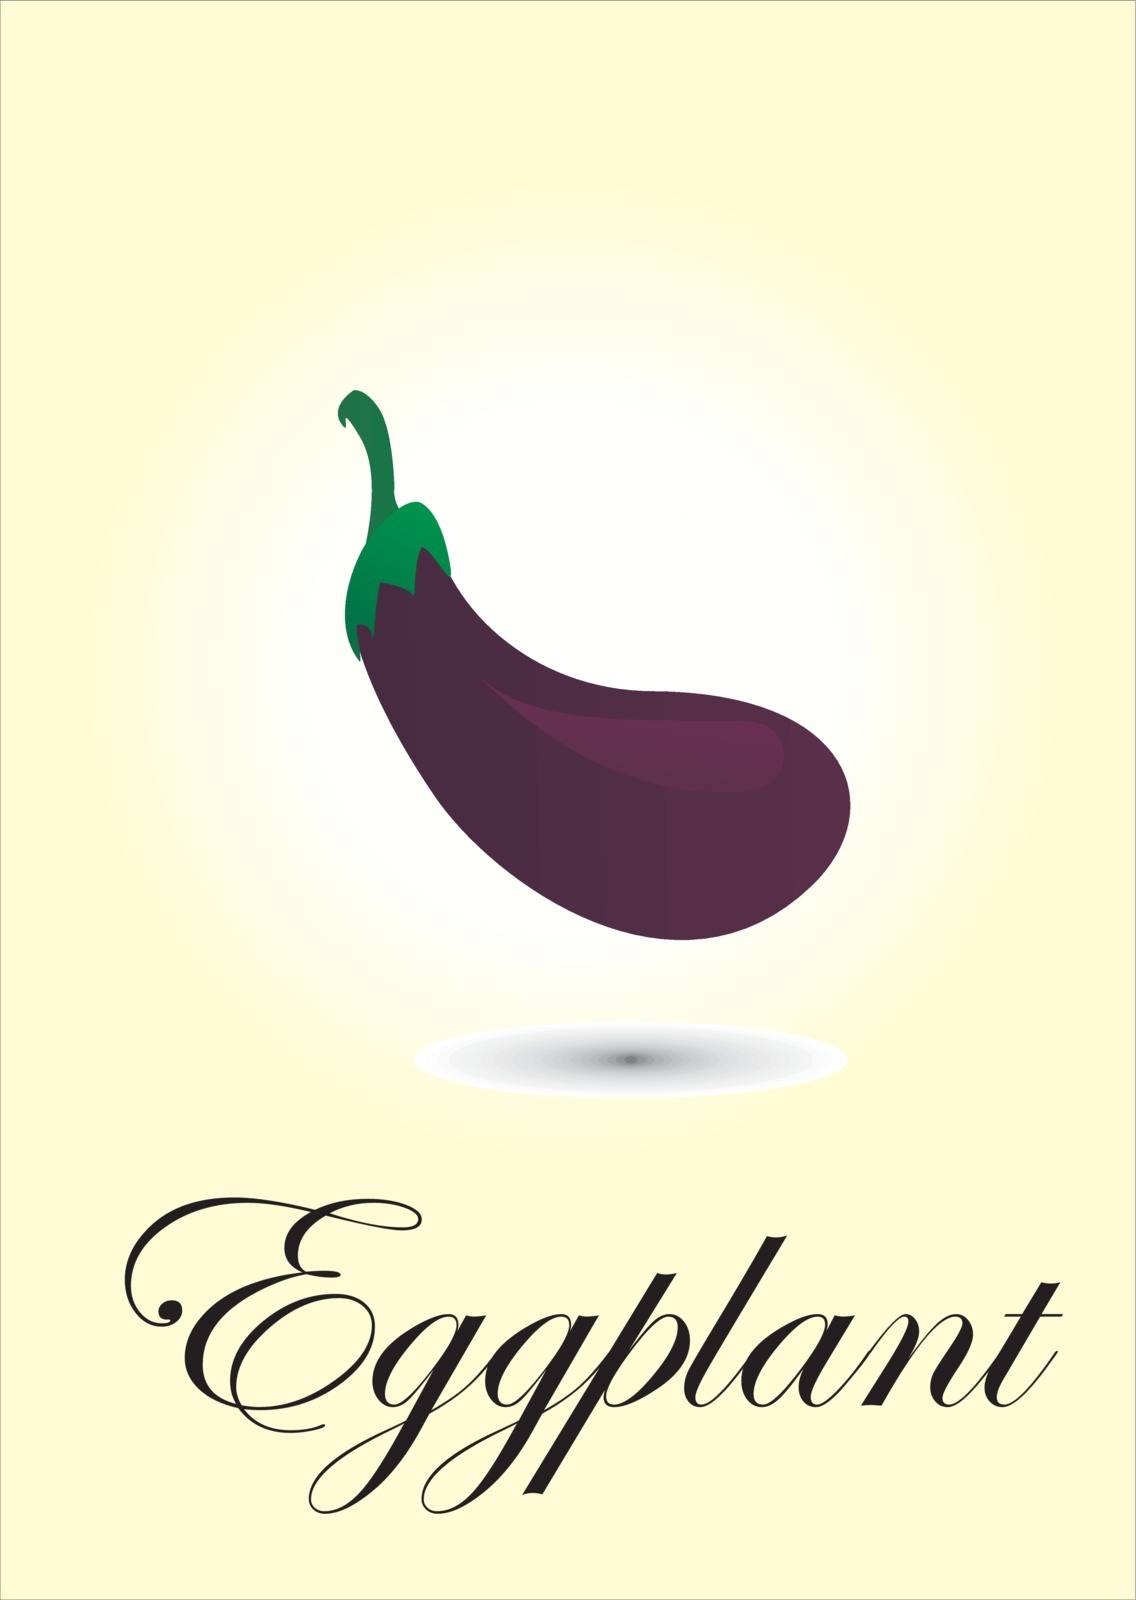 Eggplant by ciprianbolat